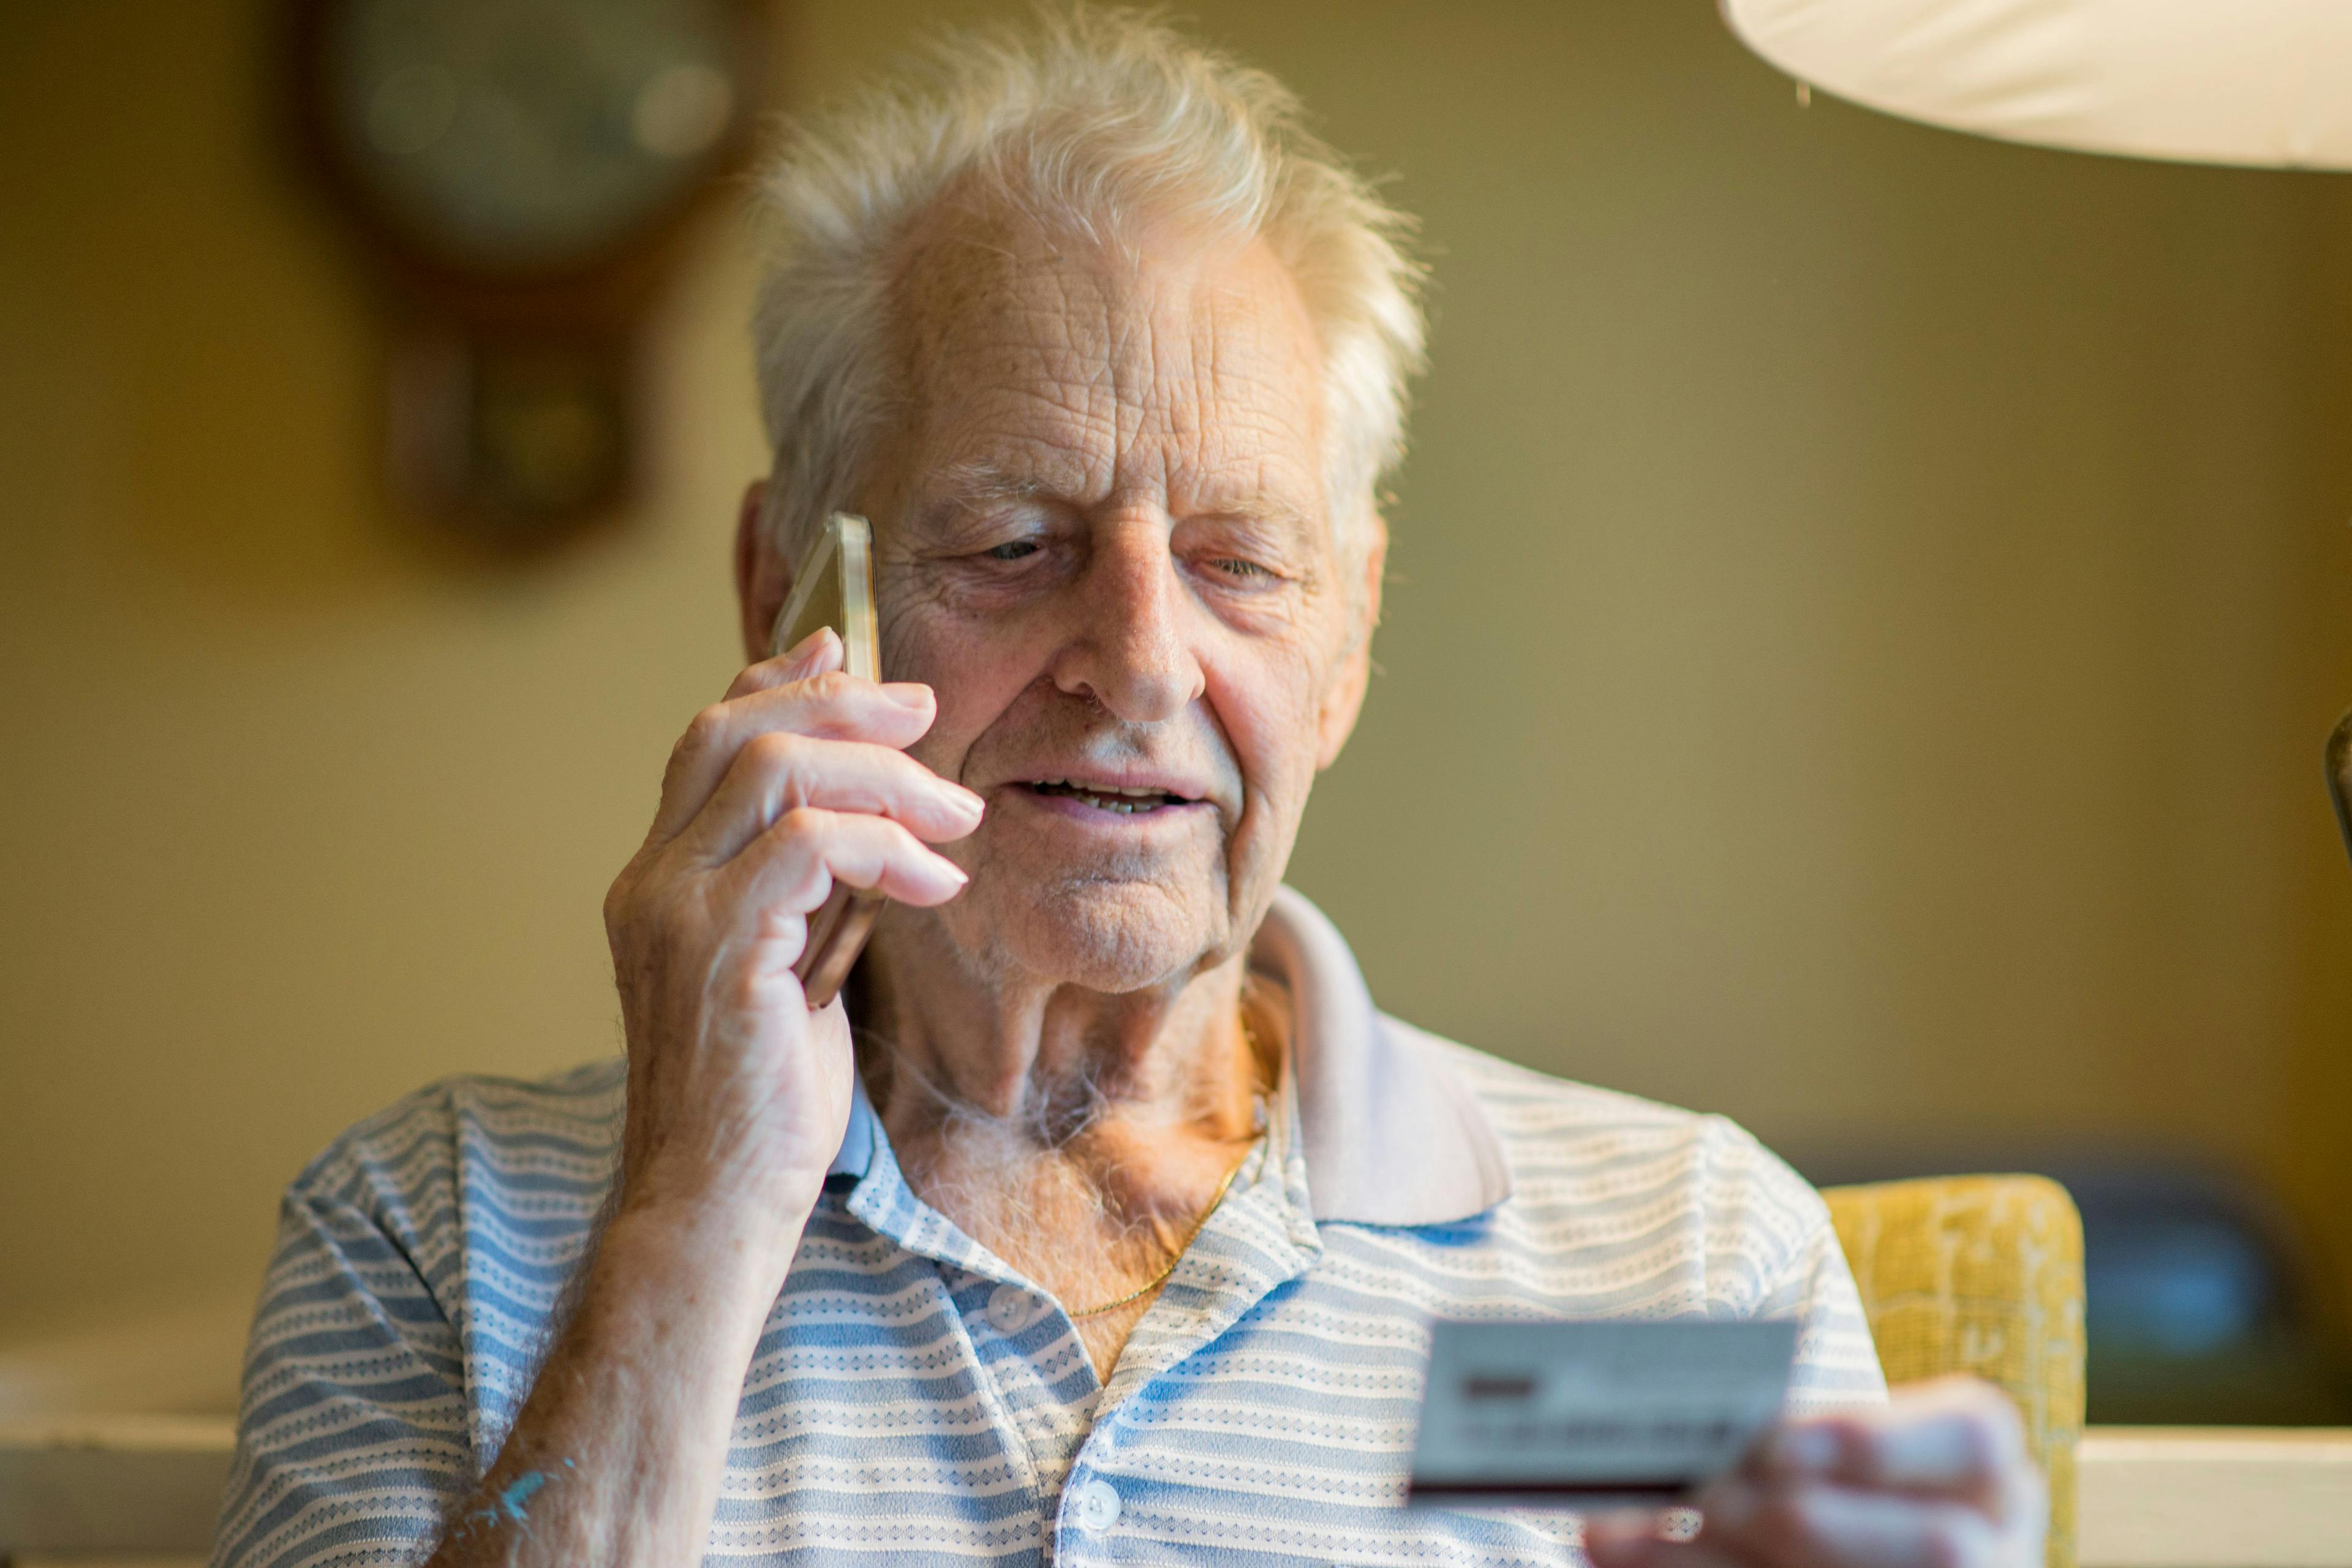 A white senior looks at his credit card information while on the phone.